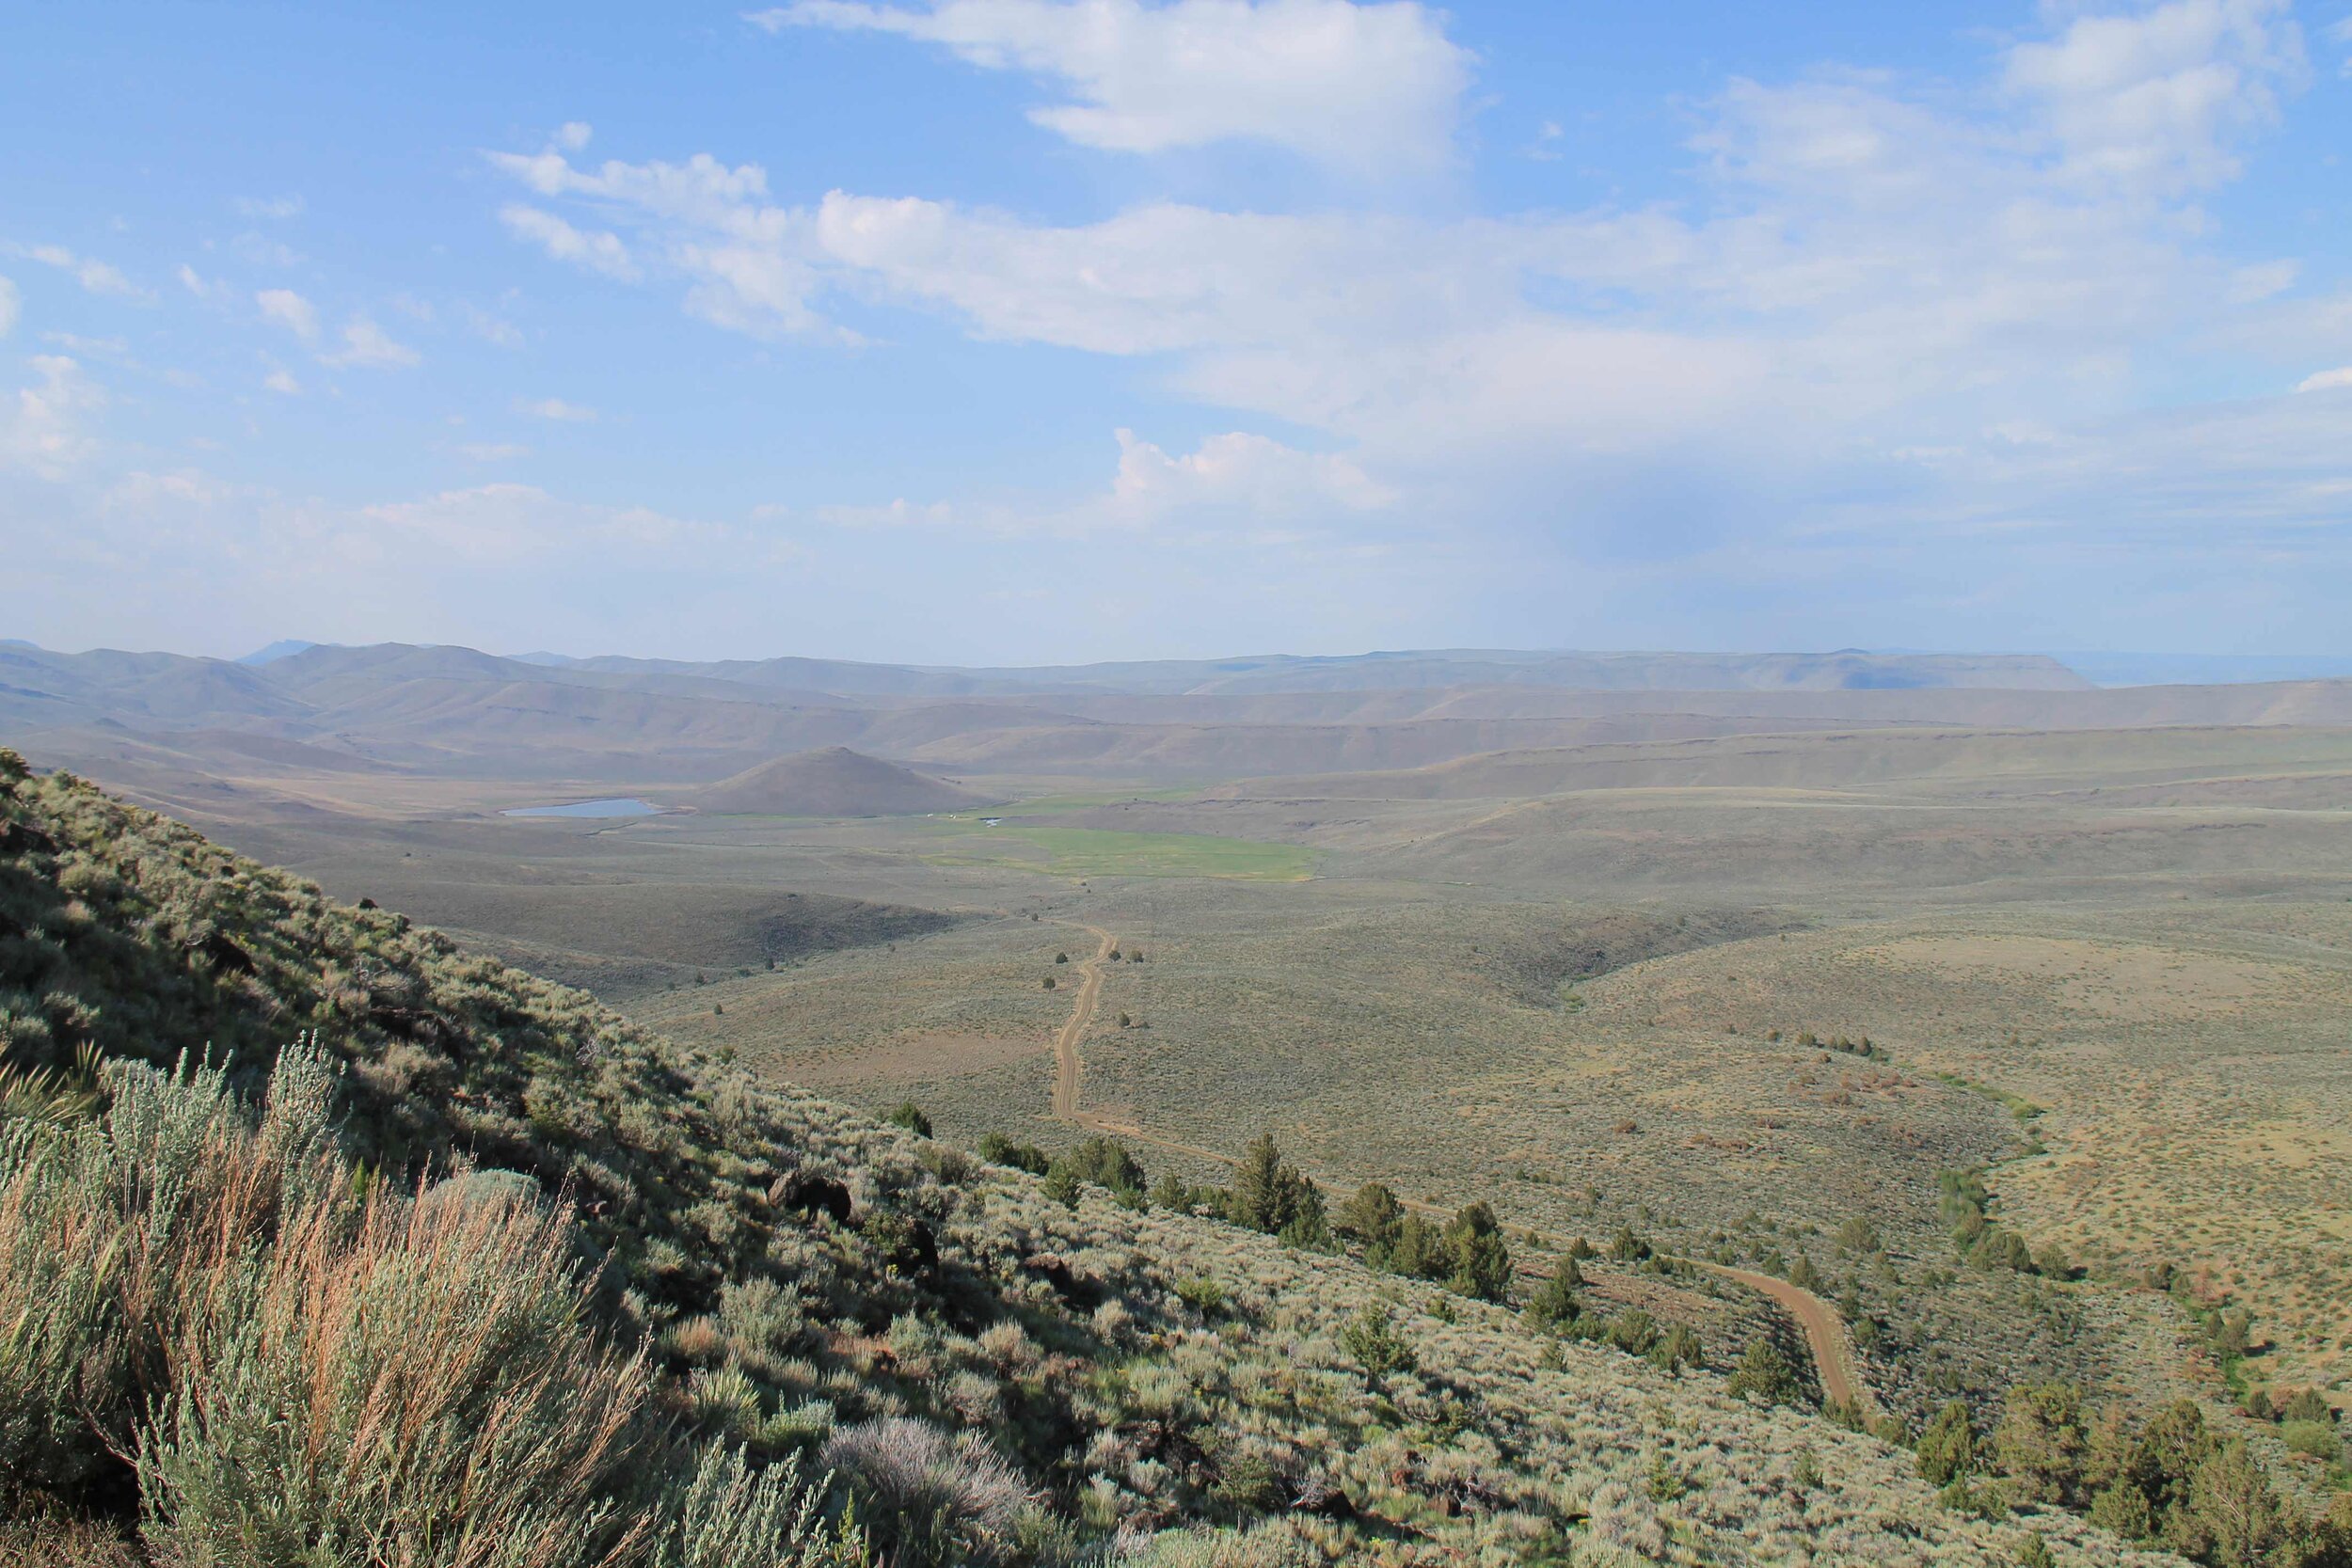  A mountain view of the sagebrush lowlands and rolling hills in the distance.  